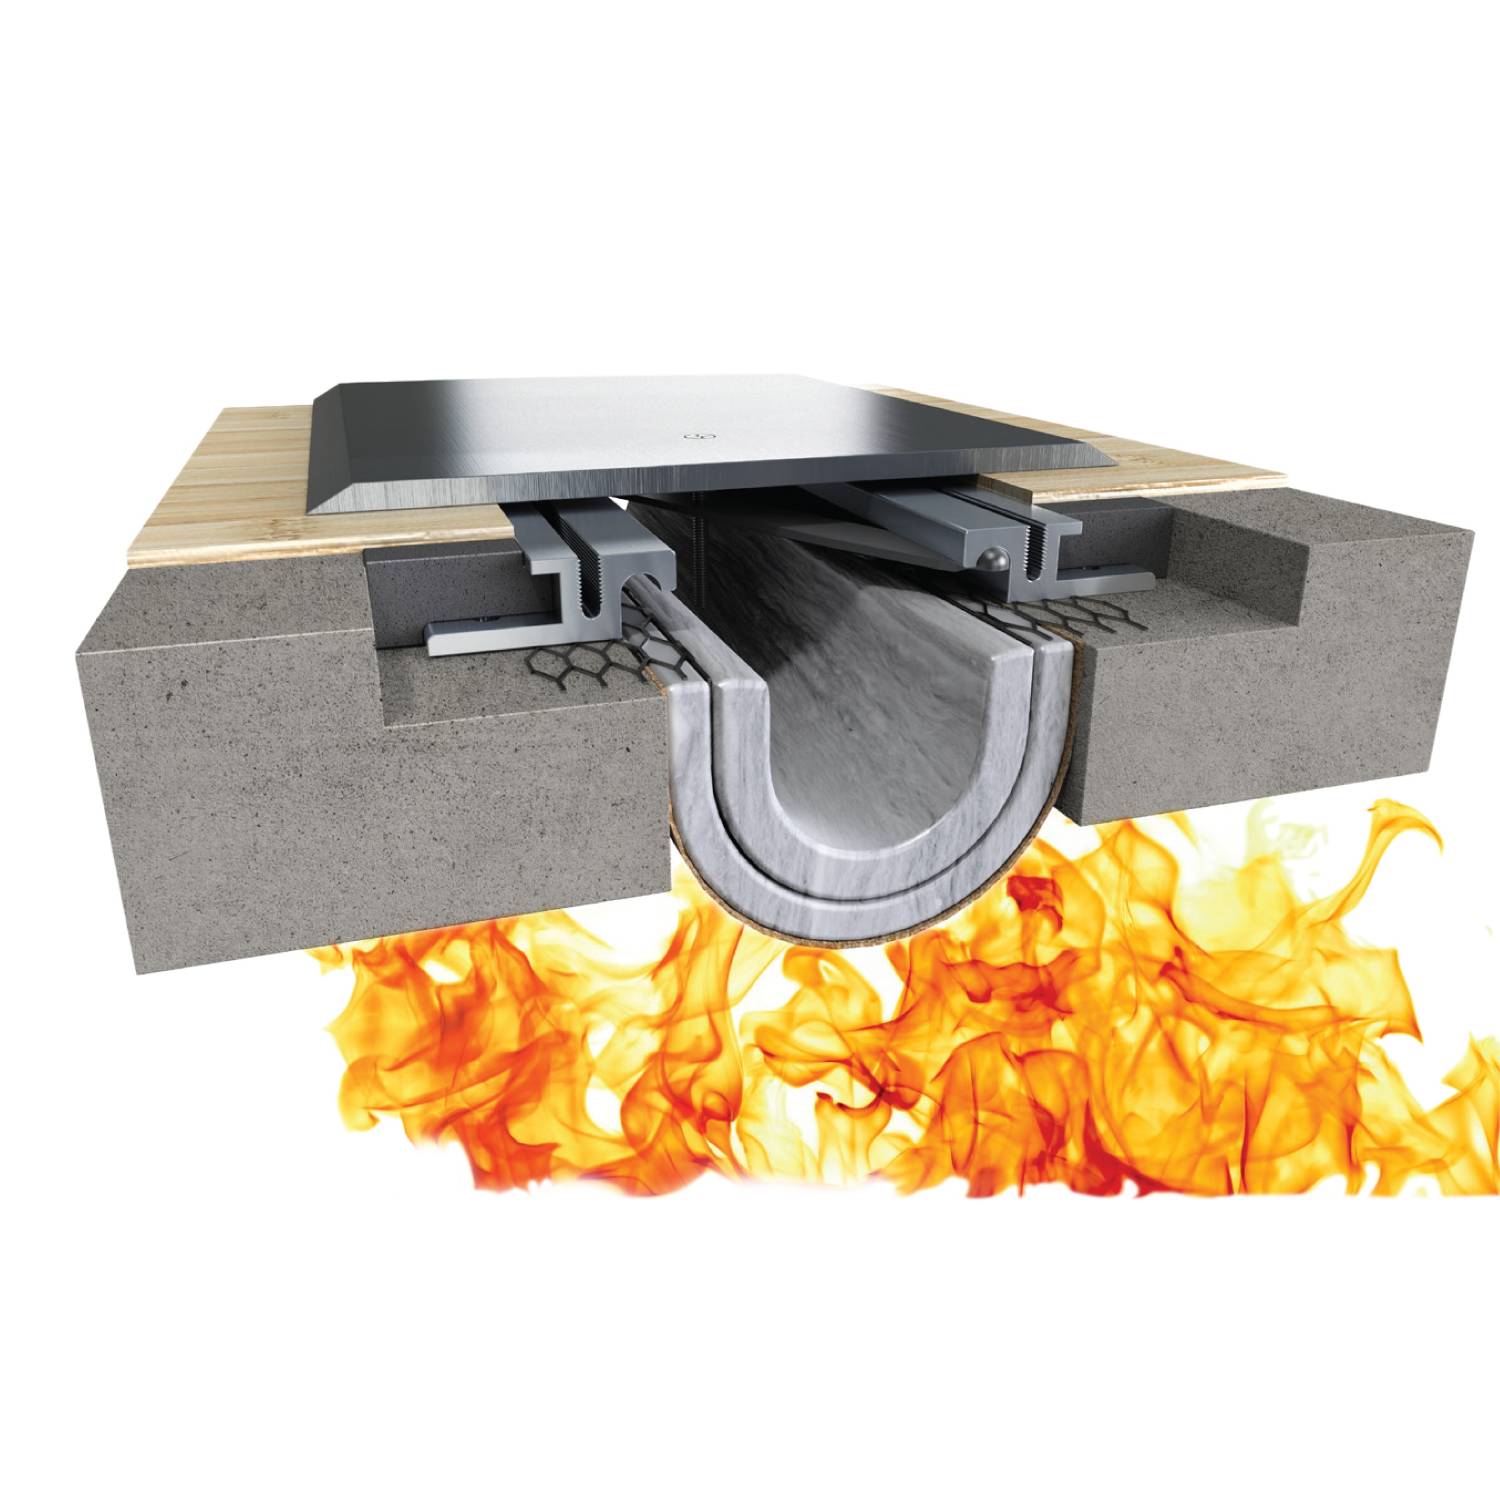 Fireline™ 520 Fire Blanket Expansion Joint System - Top Mount, Floor to Floor and Wall to Wall